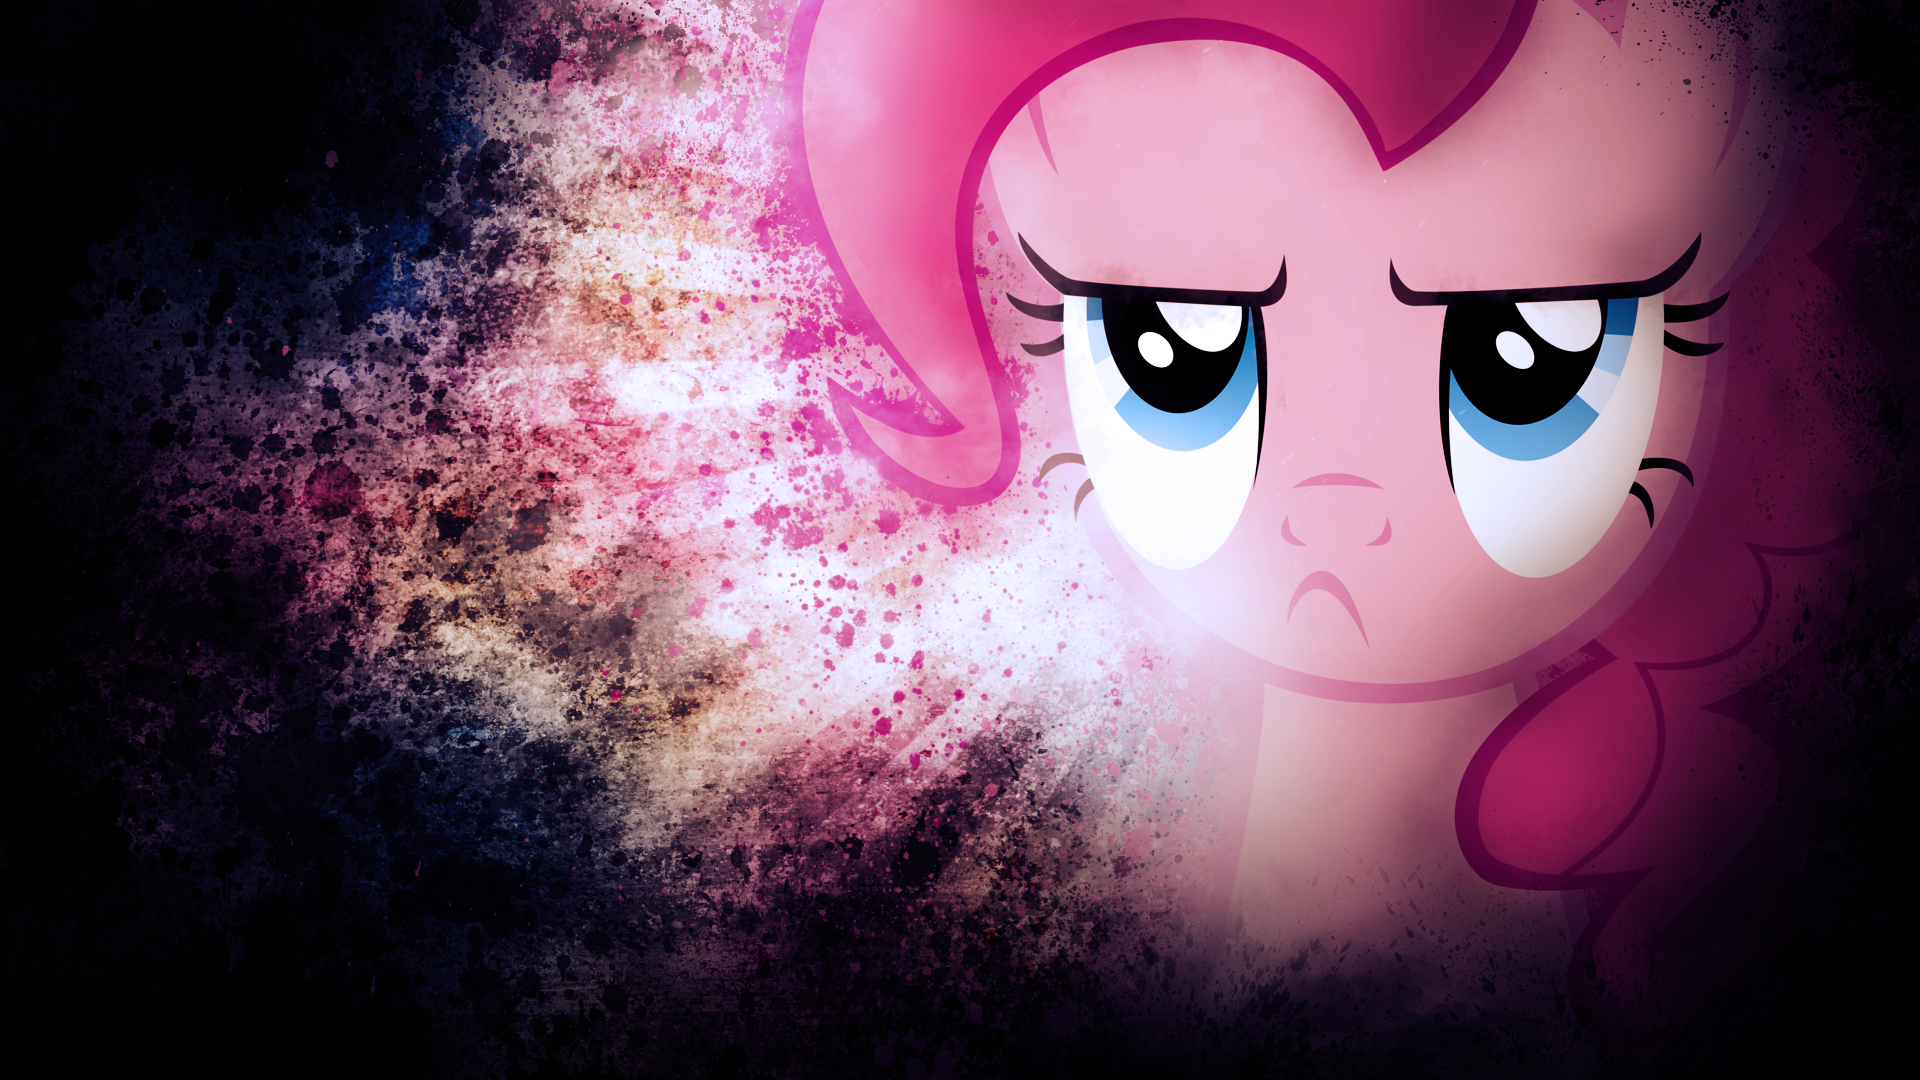 Pinkie is Watching You by Orschmann and SandwichDelta